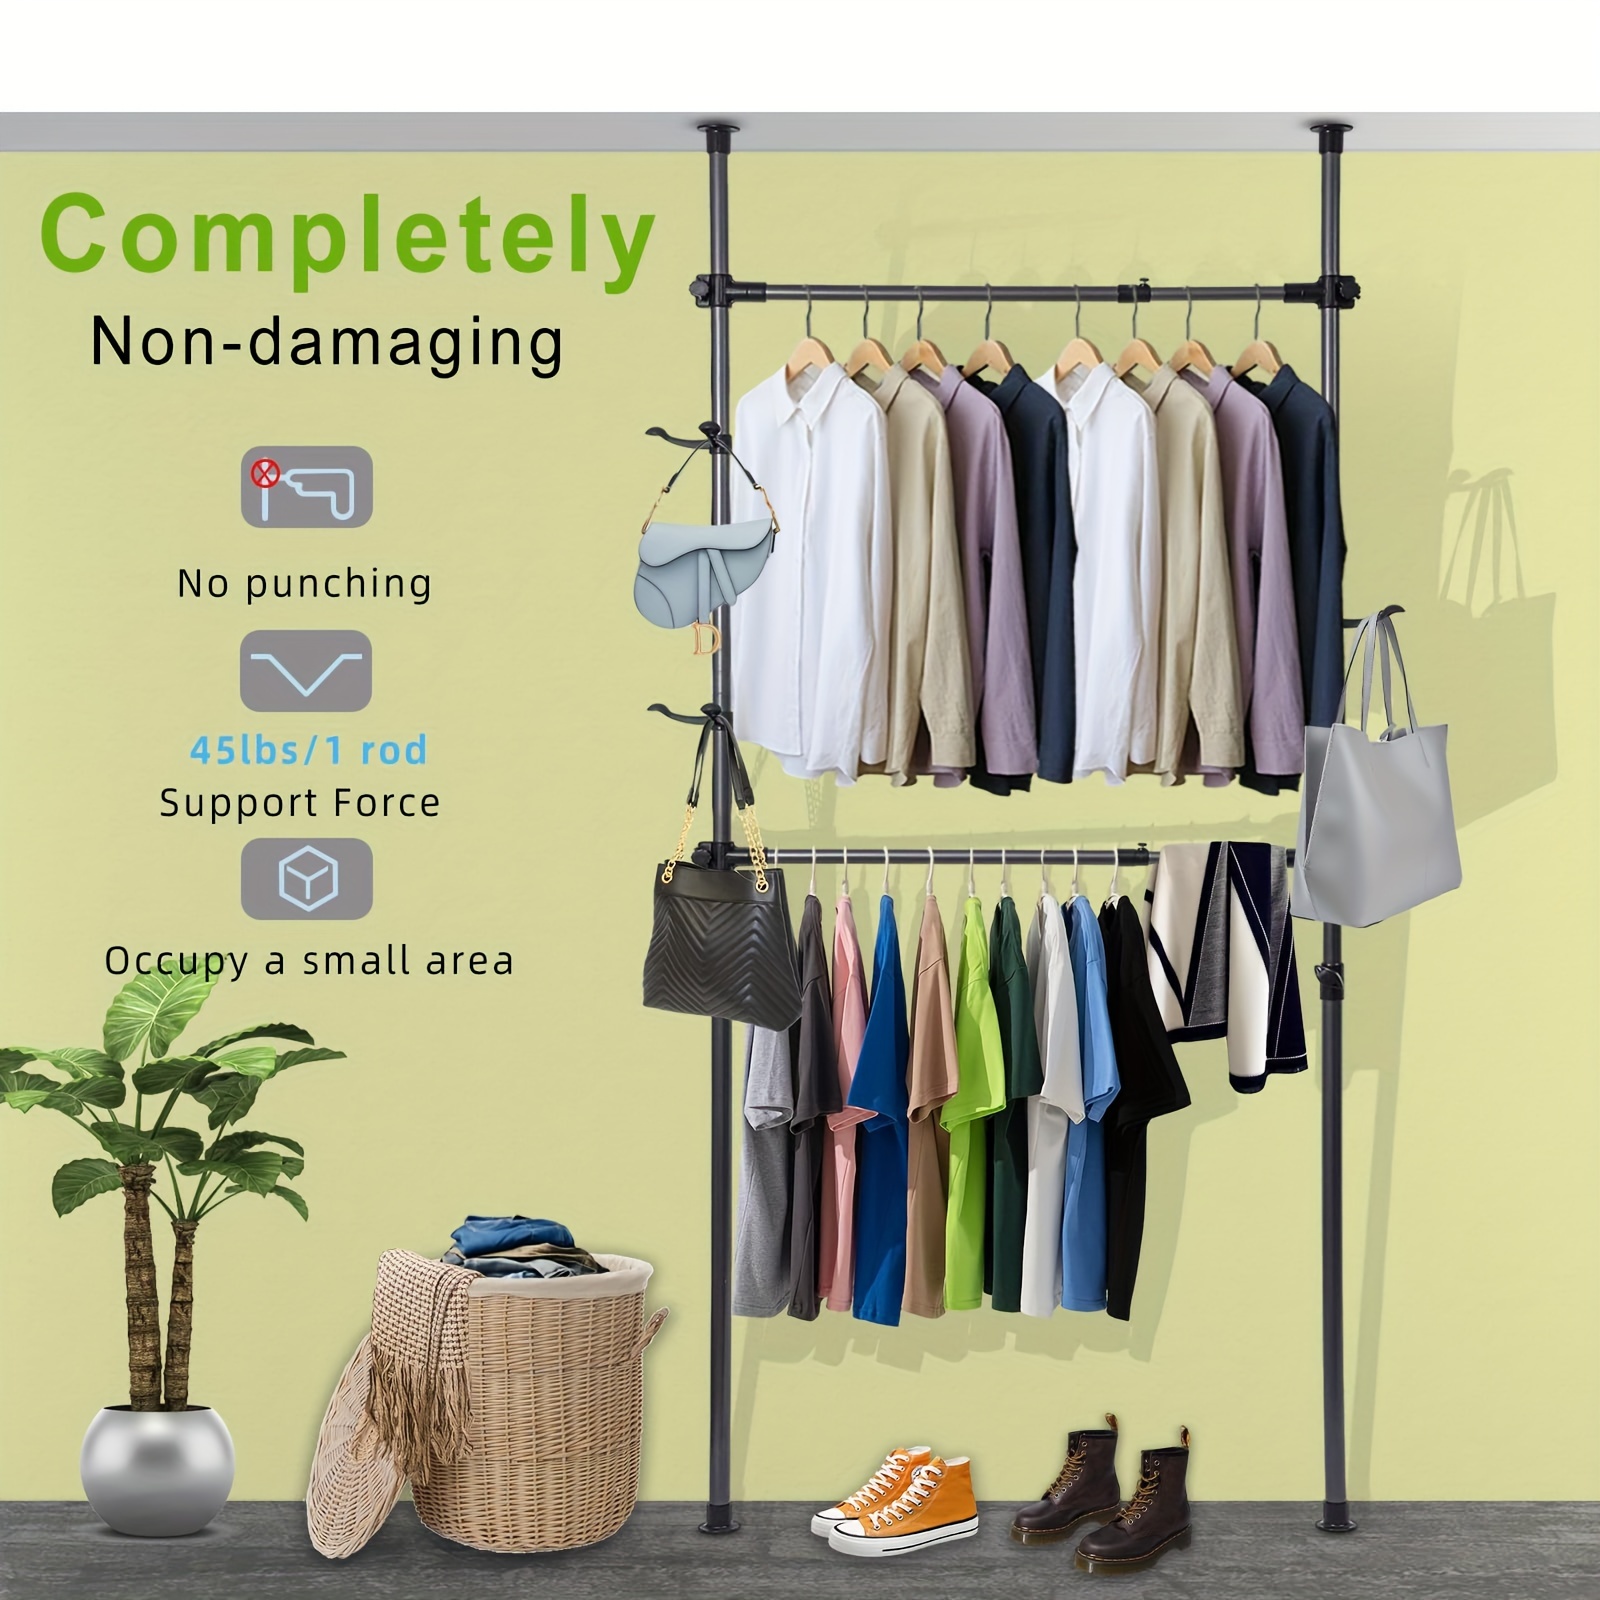 

Clothes Rack, Telescopic Clothing Rack For Hanging Clothes, 86 Inch- 119 Inch Adjustable Floor To Ceiling Heavy Duty Coat Rack Double Rod Clothing Garment Rack